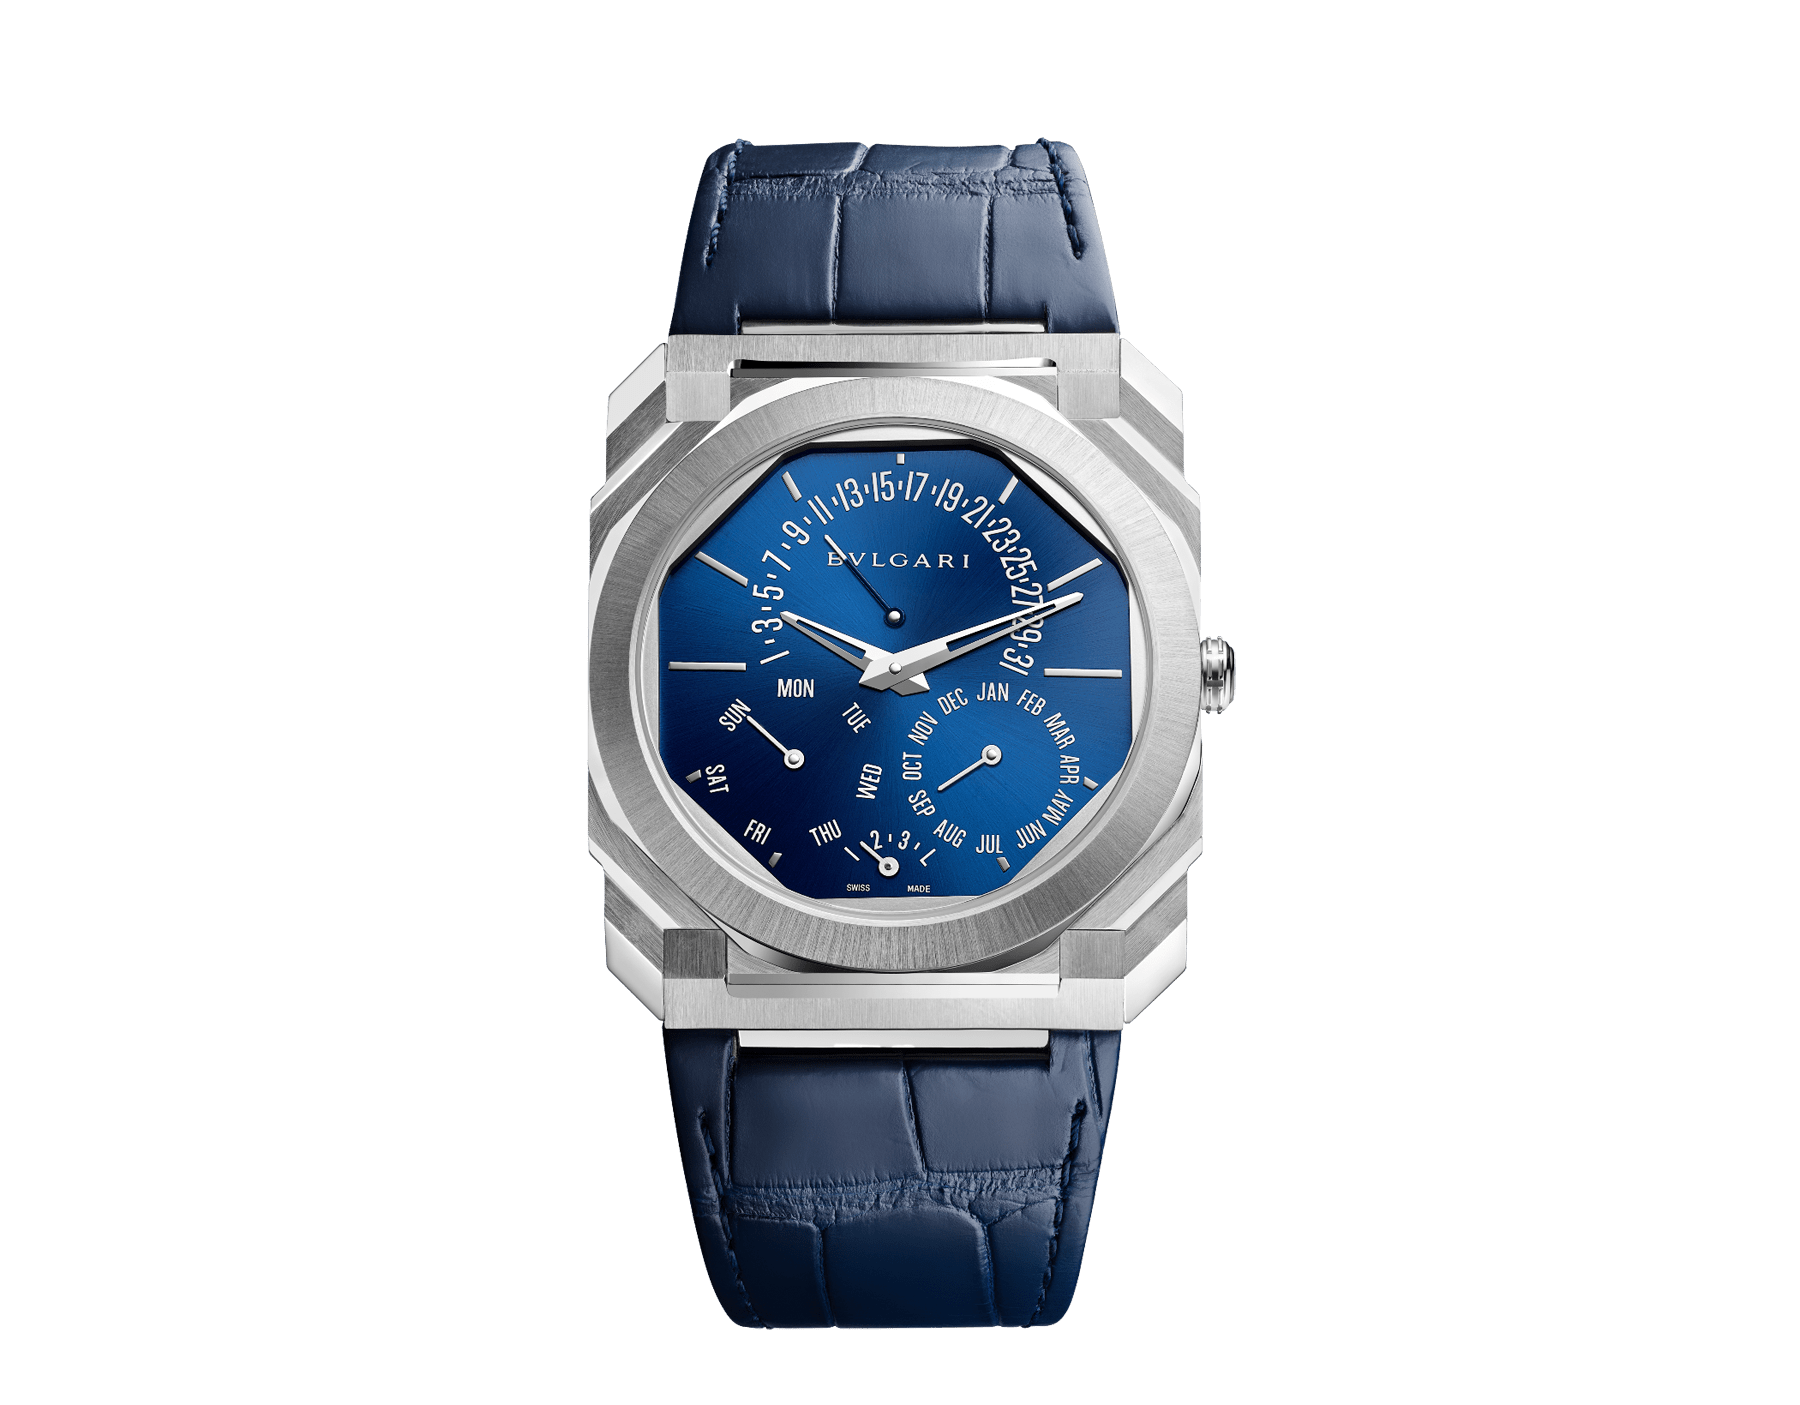 Octo Finissimo Perpetual Calendar watch with 40 mm satin-polished platinum case, 5,80 mm thick, transparent case back, satin-polished white gold crown with black ceramic insert, blue lacquered dial, blue alligator strap with platinum pin buckle. BVL 305 manufacture ultra-thin automatic winding mechanical movement with perpetual calendar, day, month, retrograde date and retrograde leap year, 2,75 mm thick, 60-hour power reserve, 21'600 Vph (3 Hz) frequency. Water resistant to 3 ATM. 103463 image 1